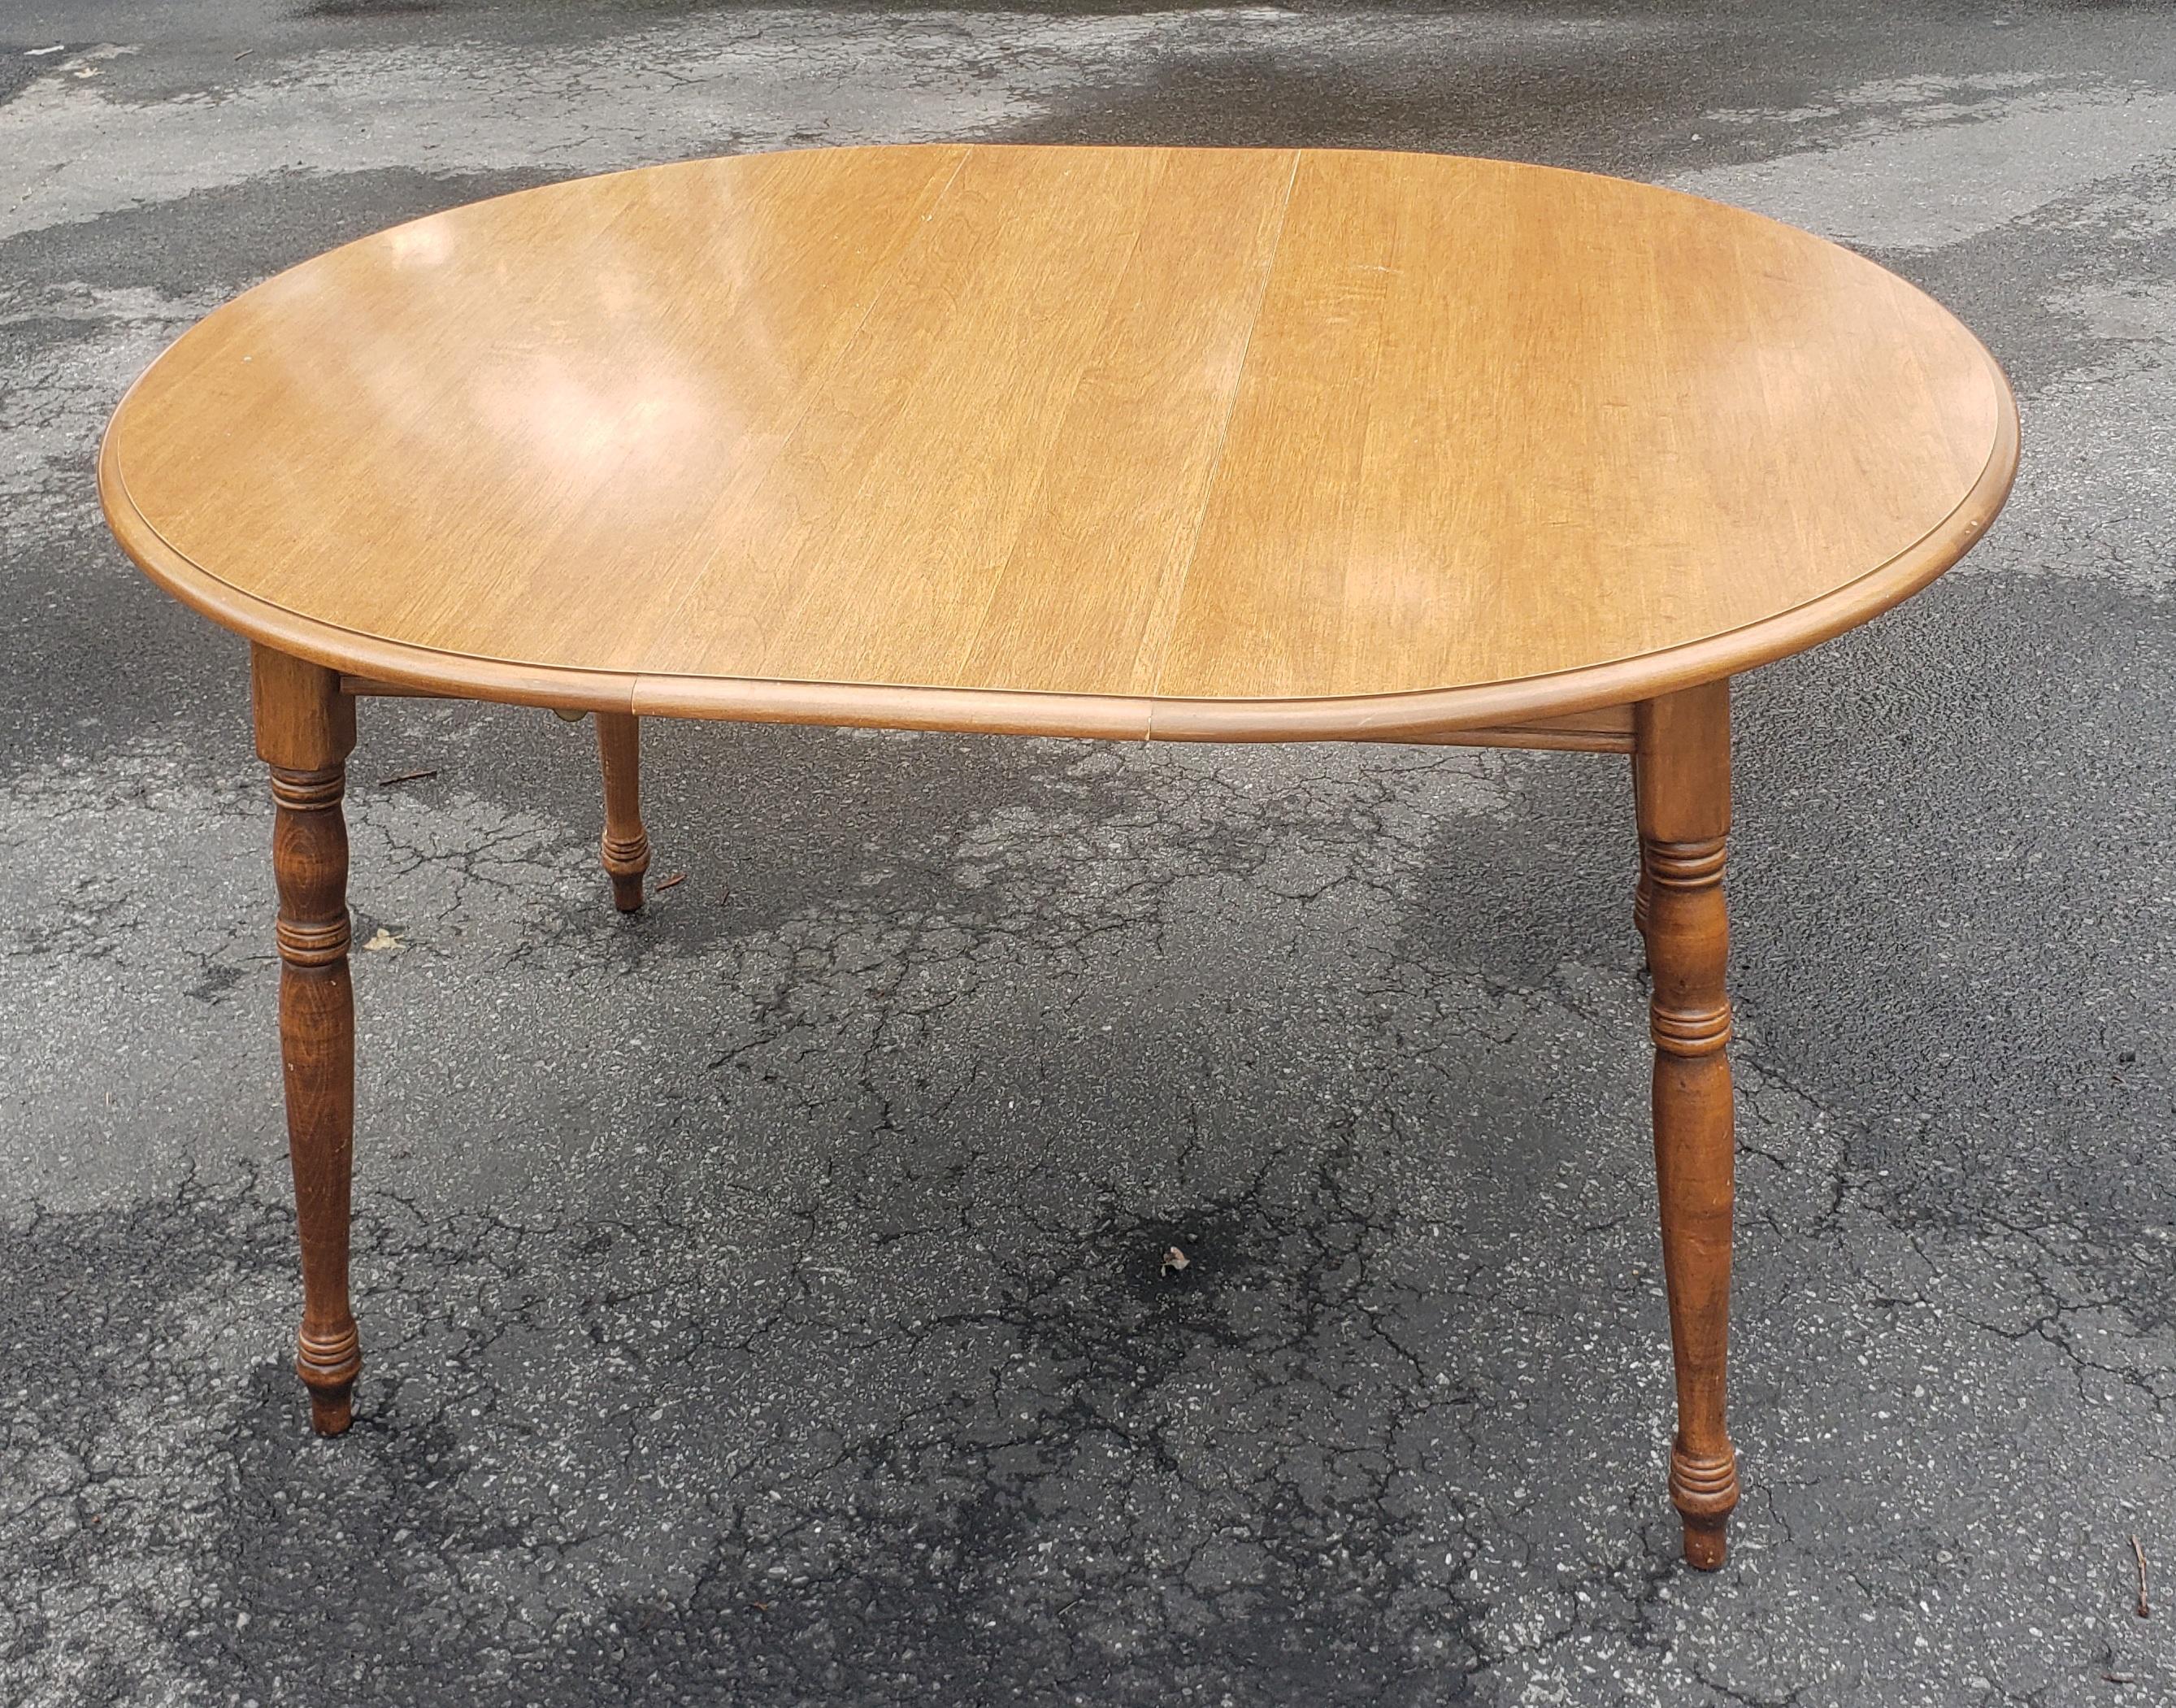 Early American Style Maple Small Dining or Kitchen Table In Good Condition For Sale In Germantown, MD